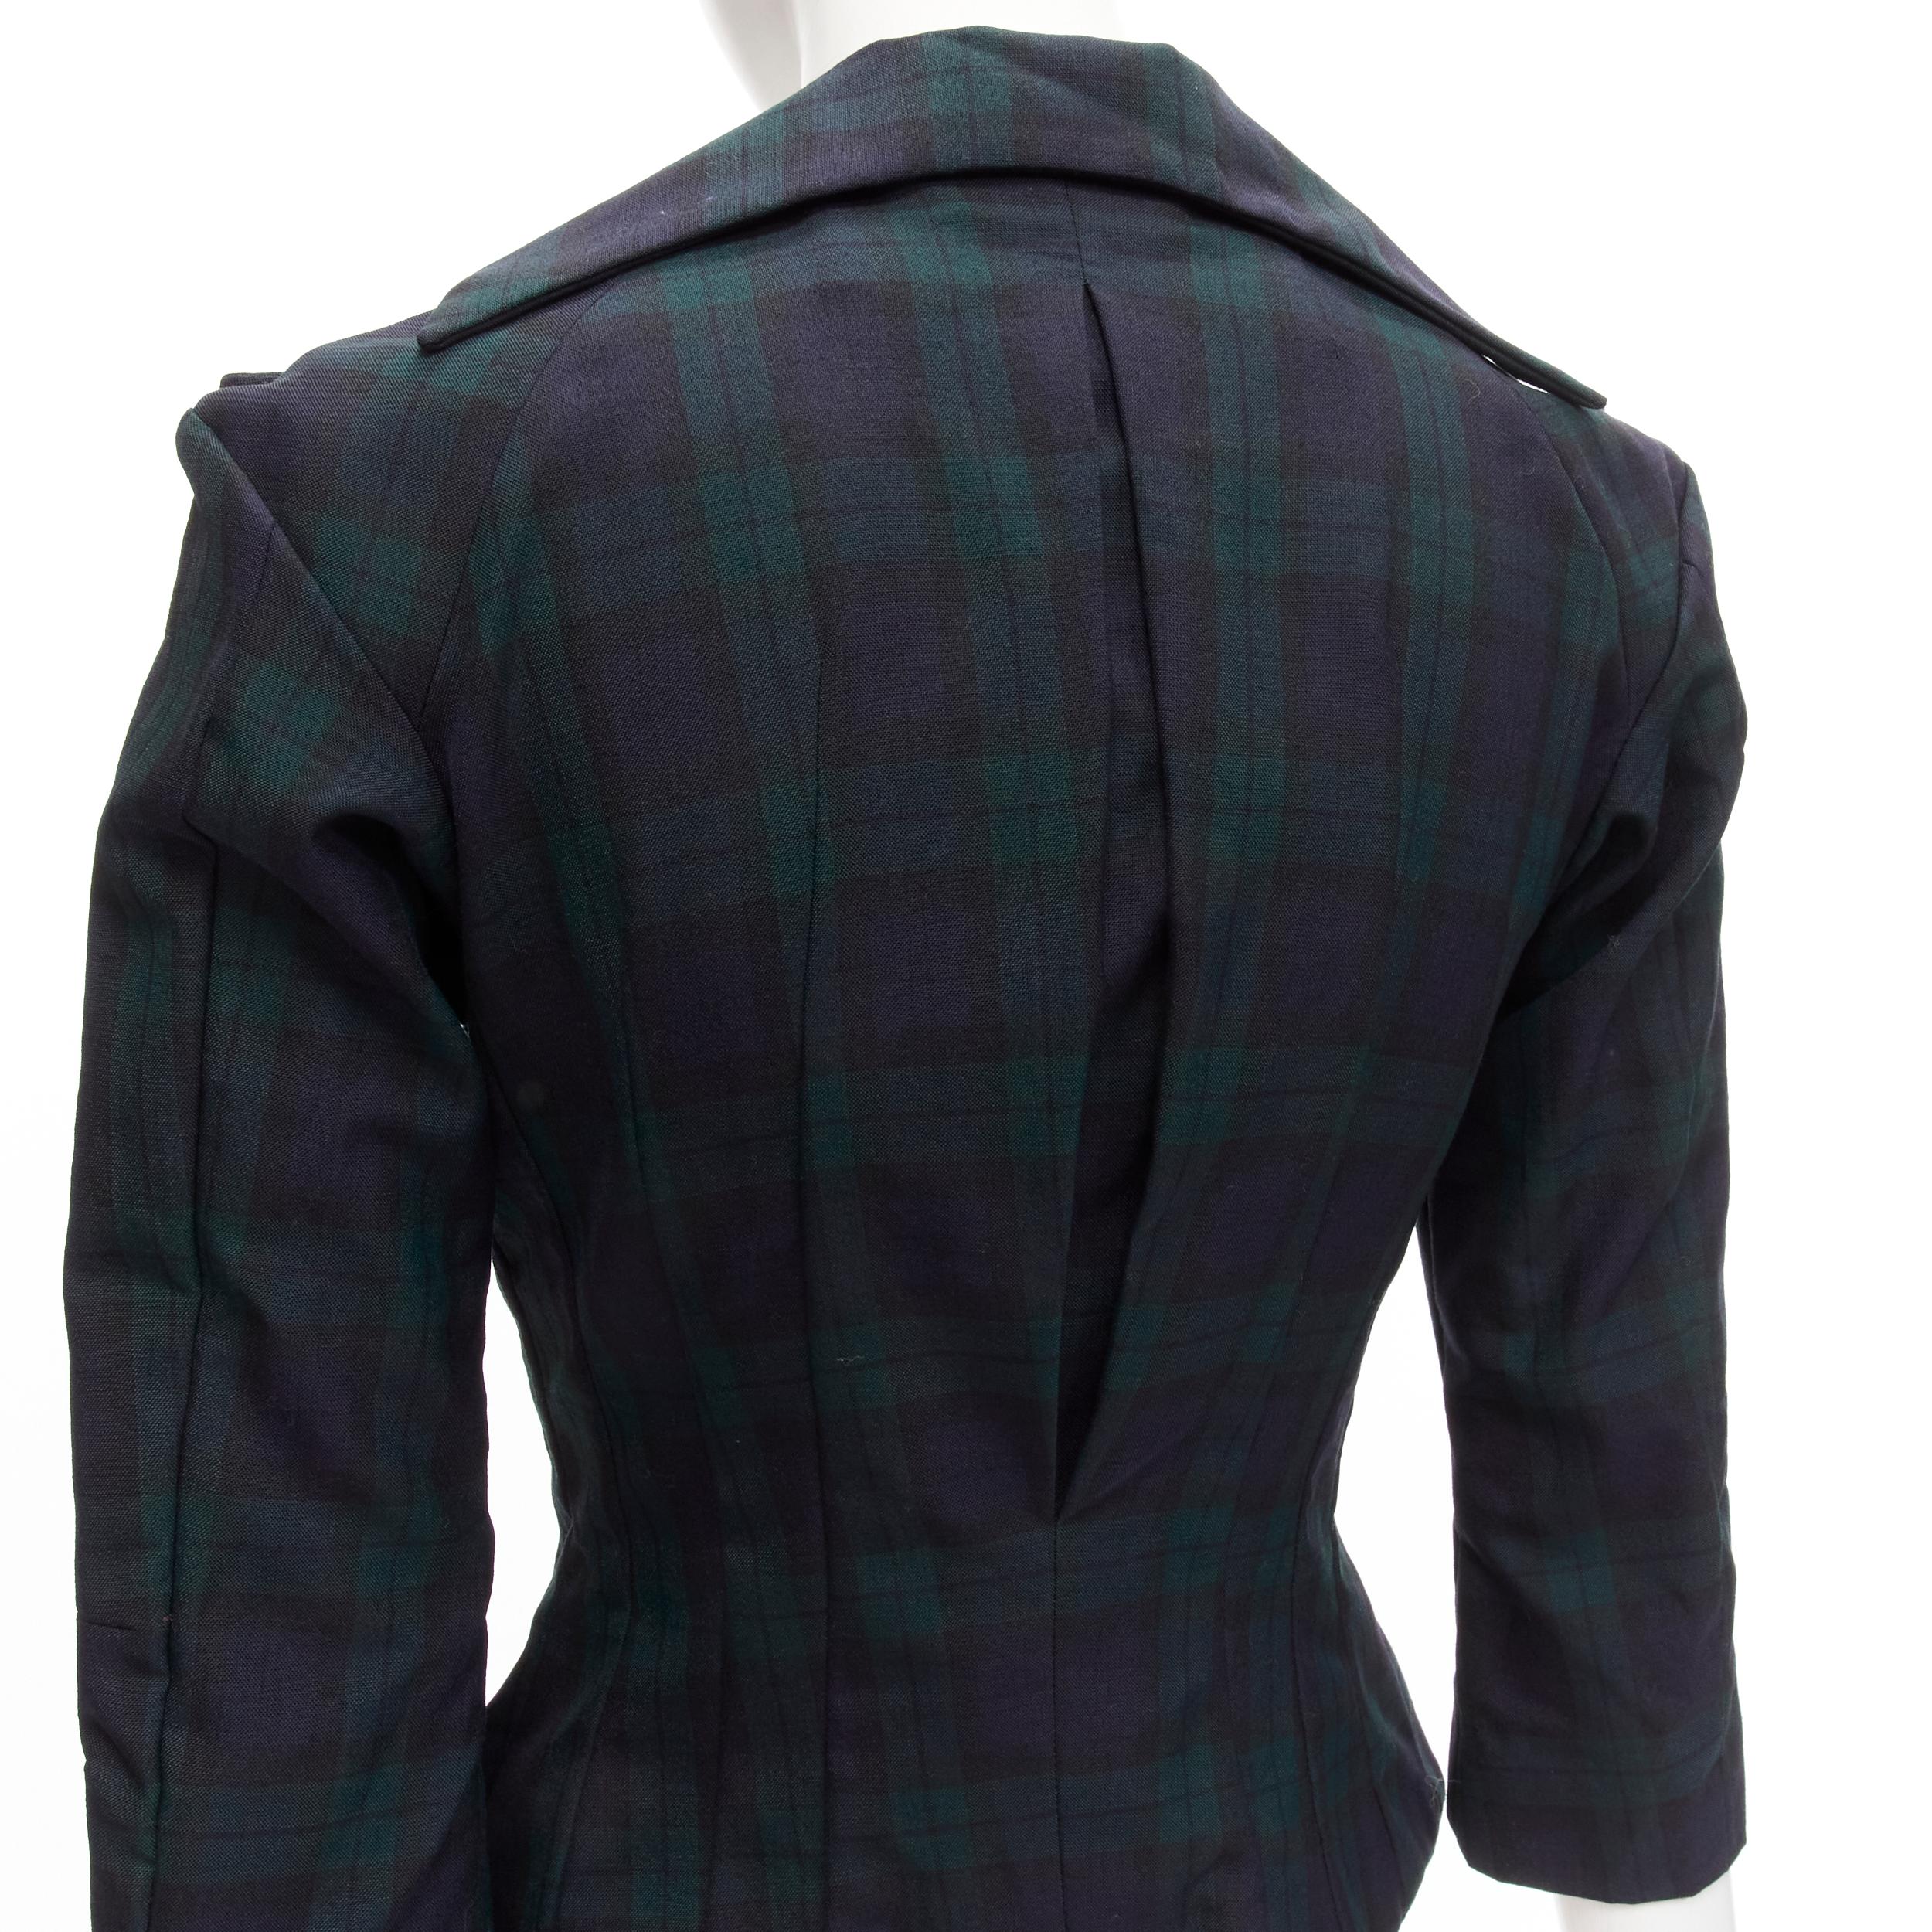 JUNYA WATANABE 1996 Vintage green navy plaid deconstructed panels fitted blazer S
Reference: TGAS/C01959
Brand: Junya Watanabe
Designer: Junya Watanabe
Collection: 1996
Material: Polyester, Wool
Color: Green, Navy
Pattern: Plaid
Closure: